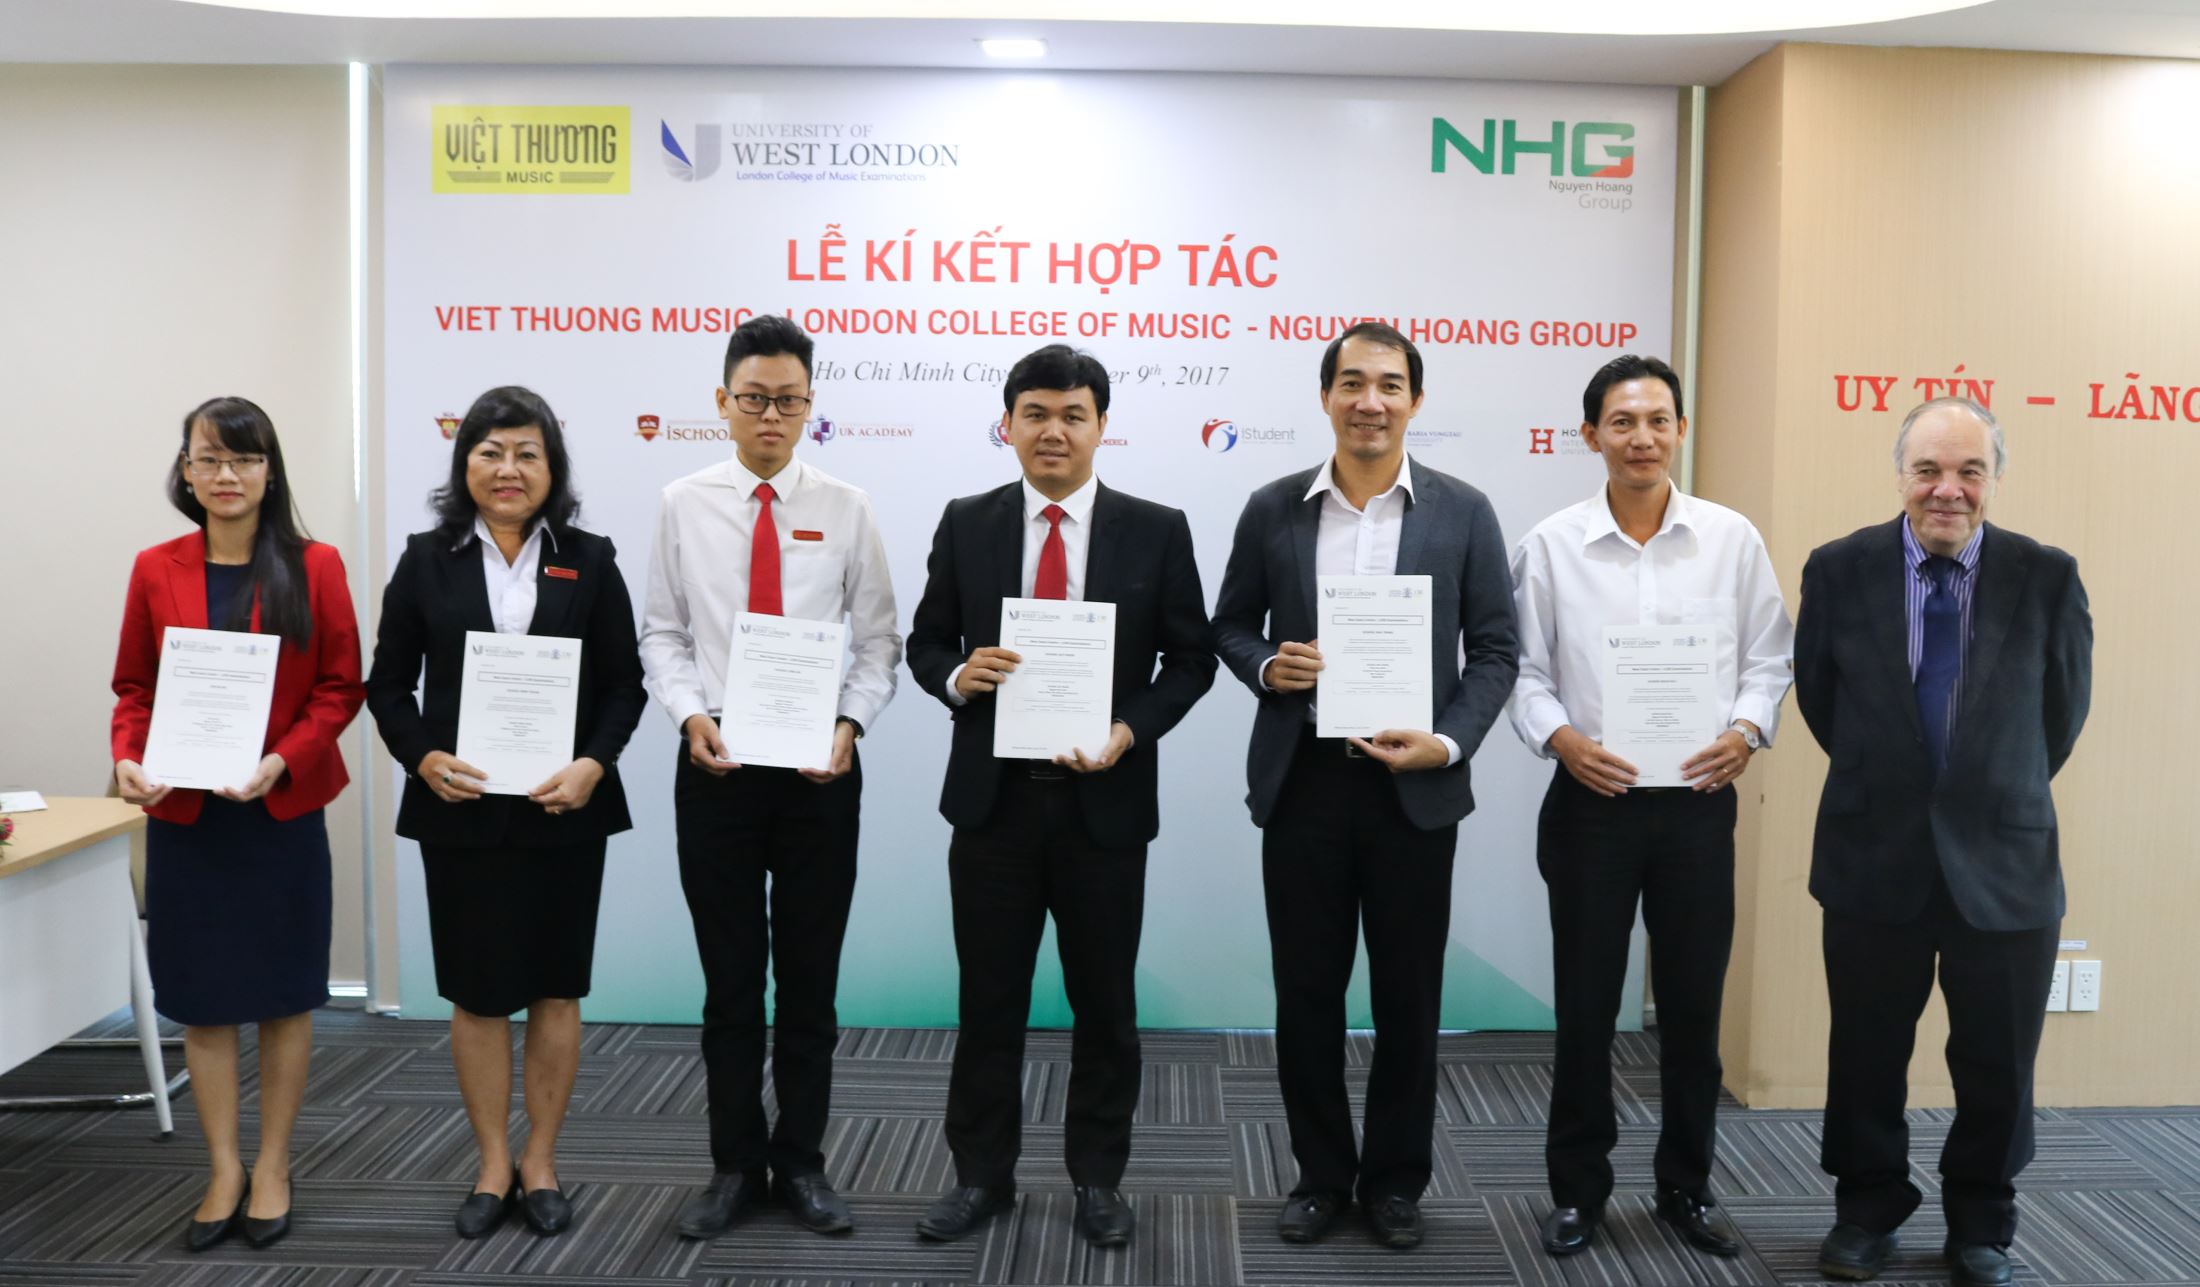 Representatives of NHG's member schools received LCME Certificate at the event